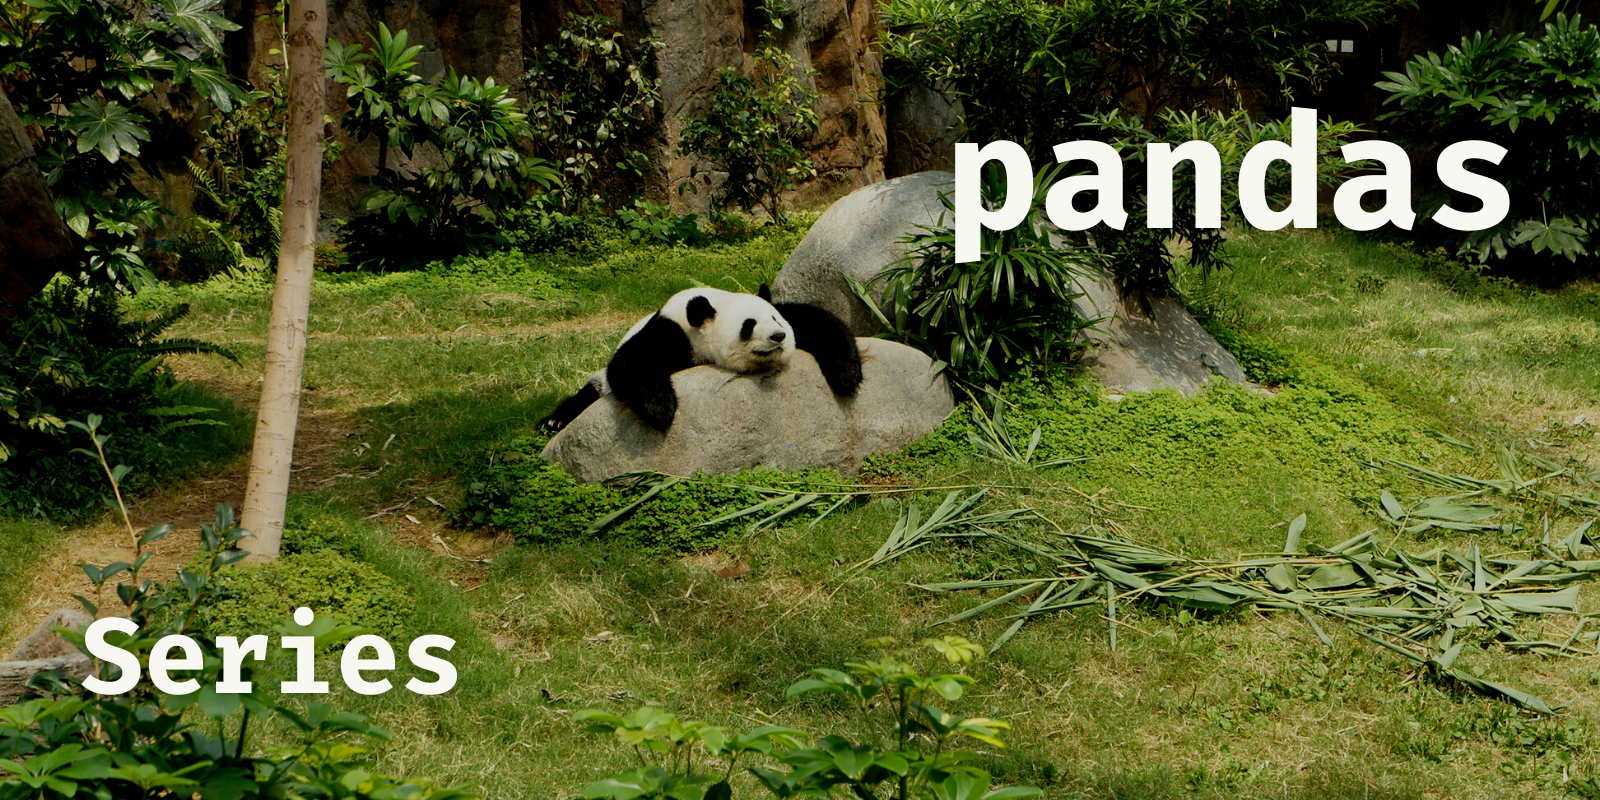 A picture of panda (the mammal) with the words "pandas" and "Series" written.